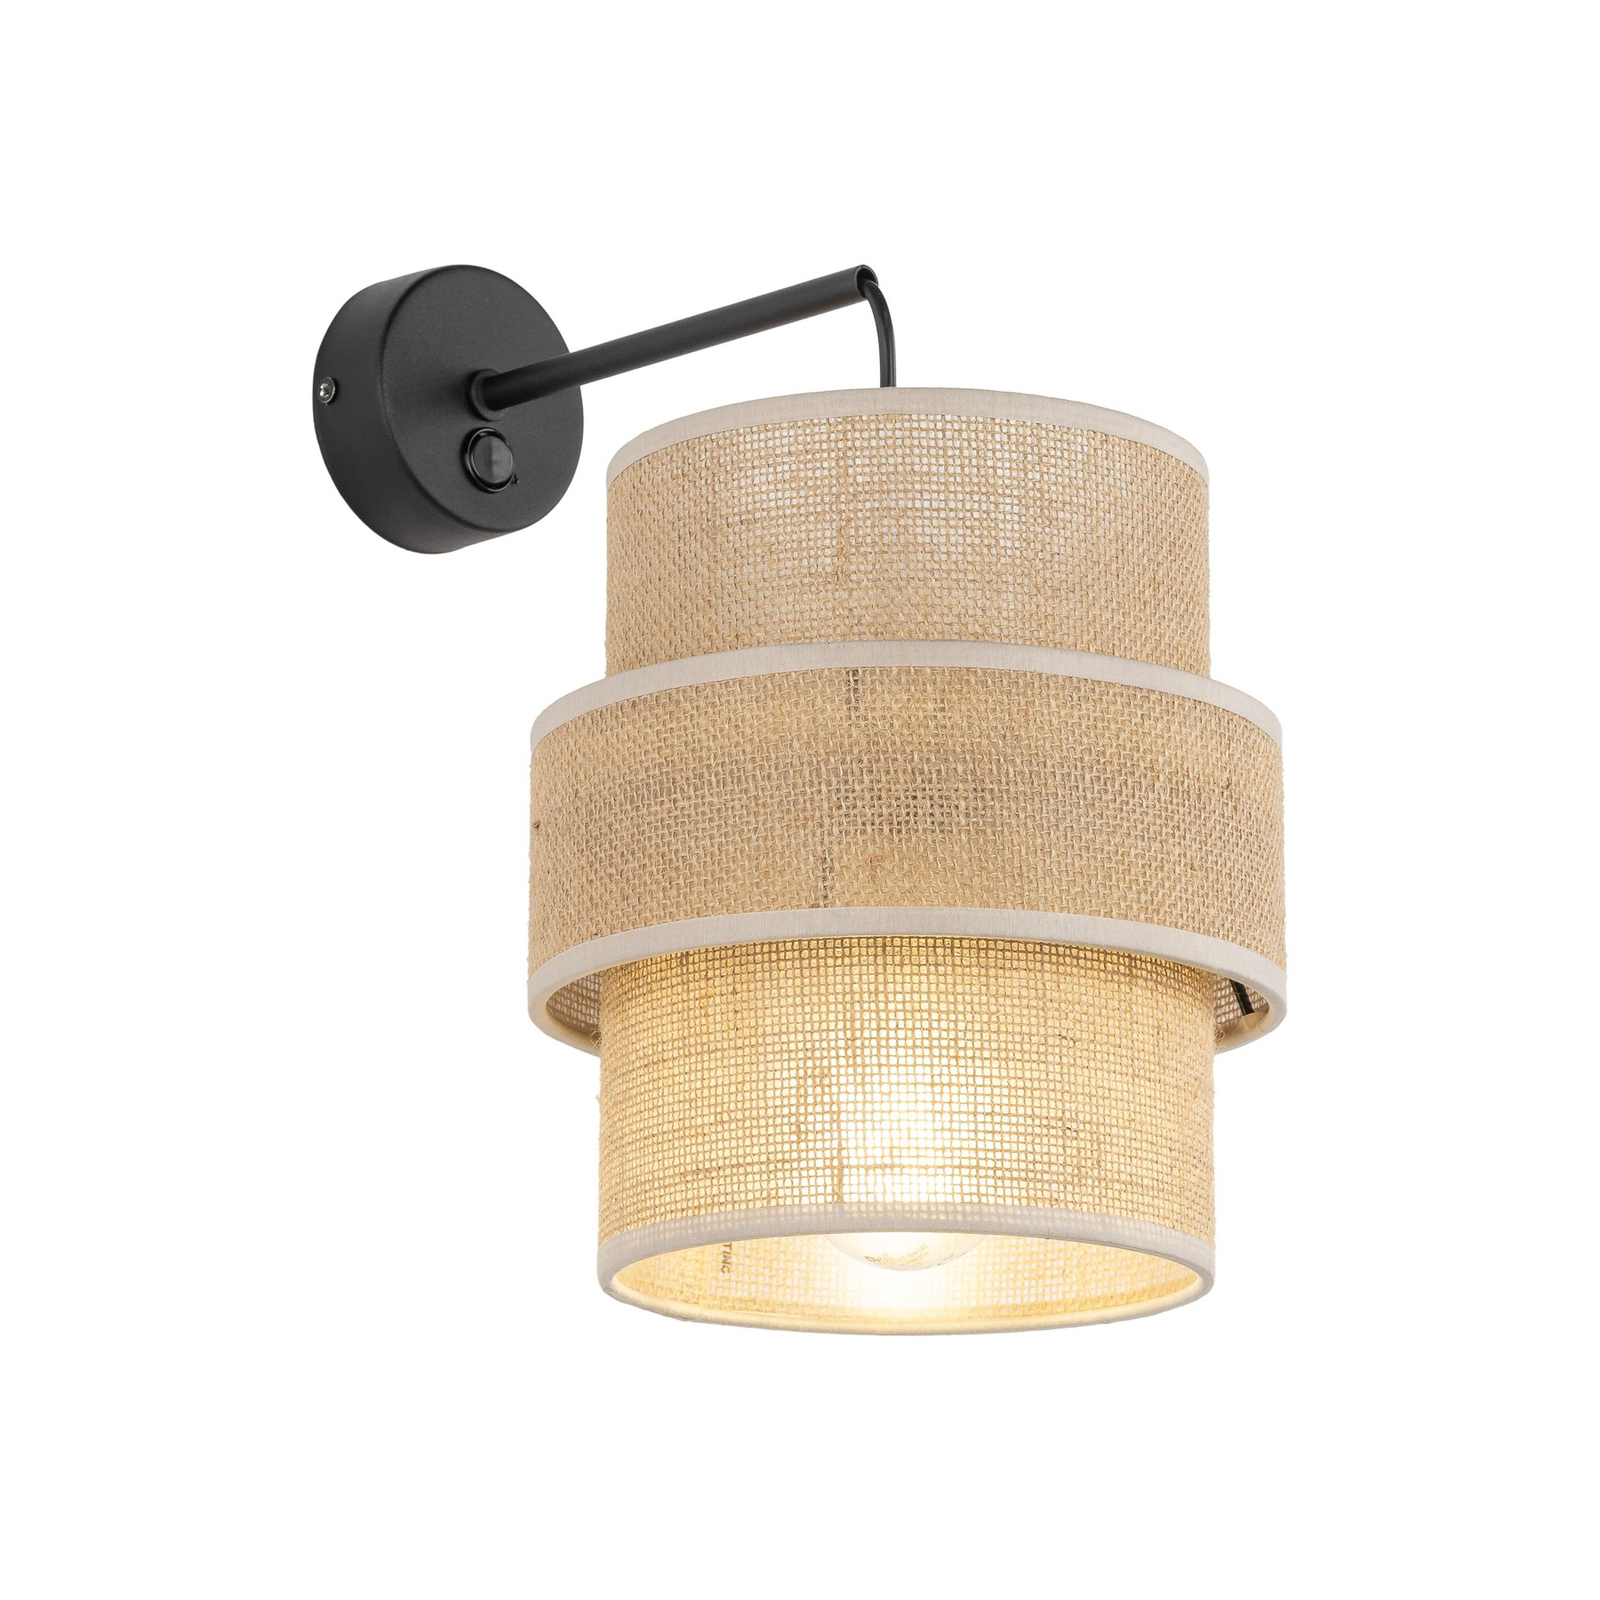 Calisto wall light, Jute, natural brown, switch